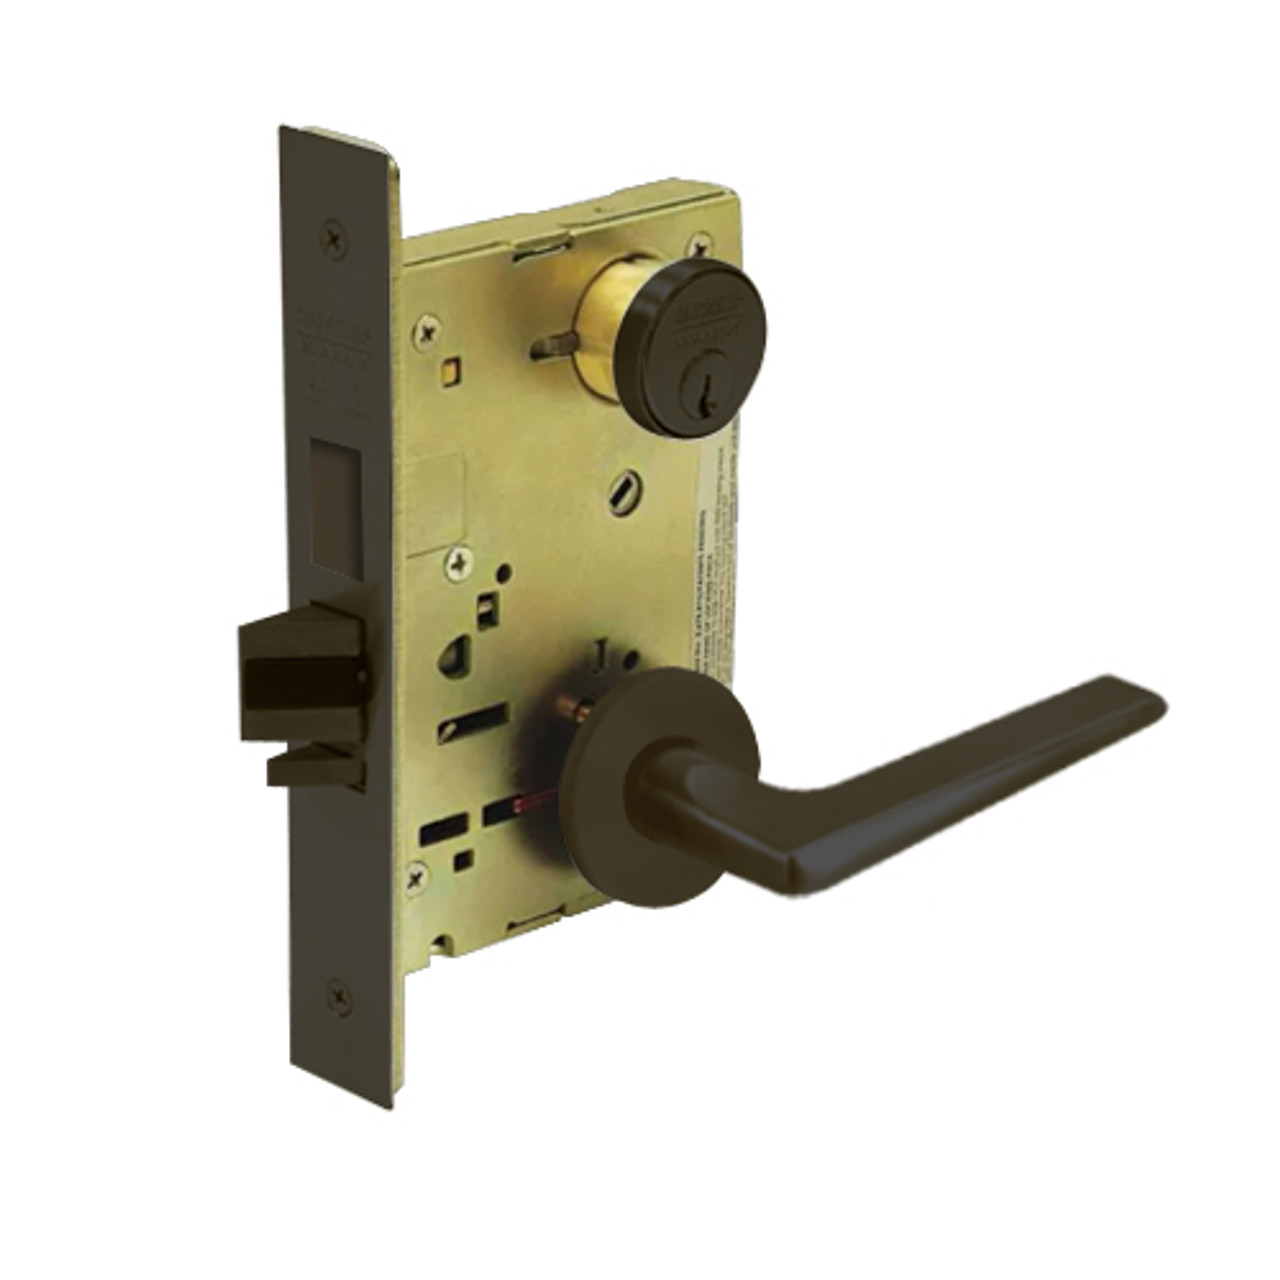 8249-LNF-10B Sargent 8200 Series Security Deadbolt Mortise Lock with LNF Lever Trim in Oxidized Dull Bronze